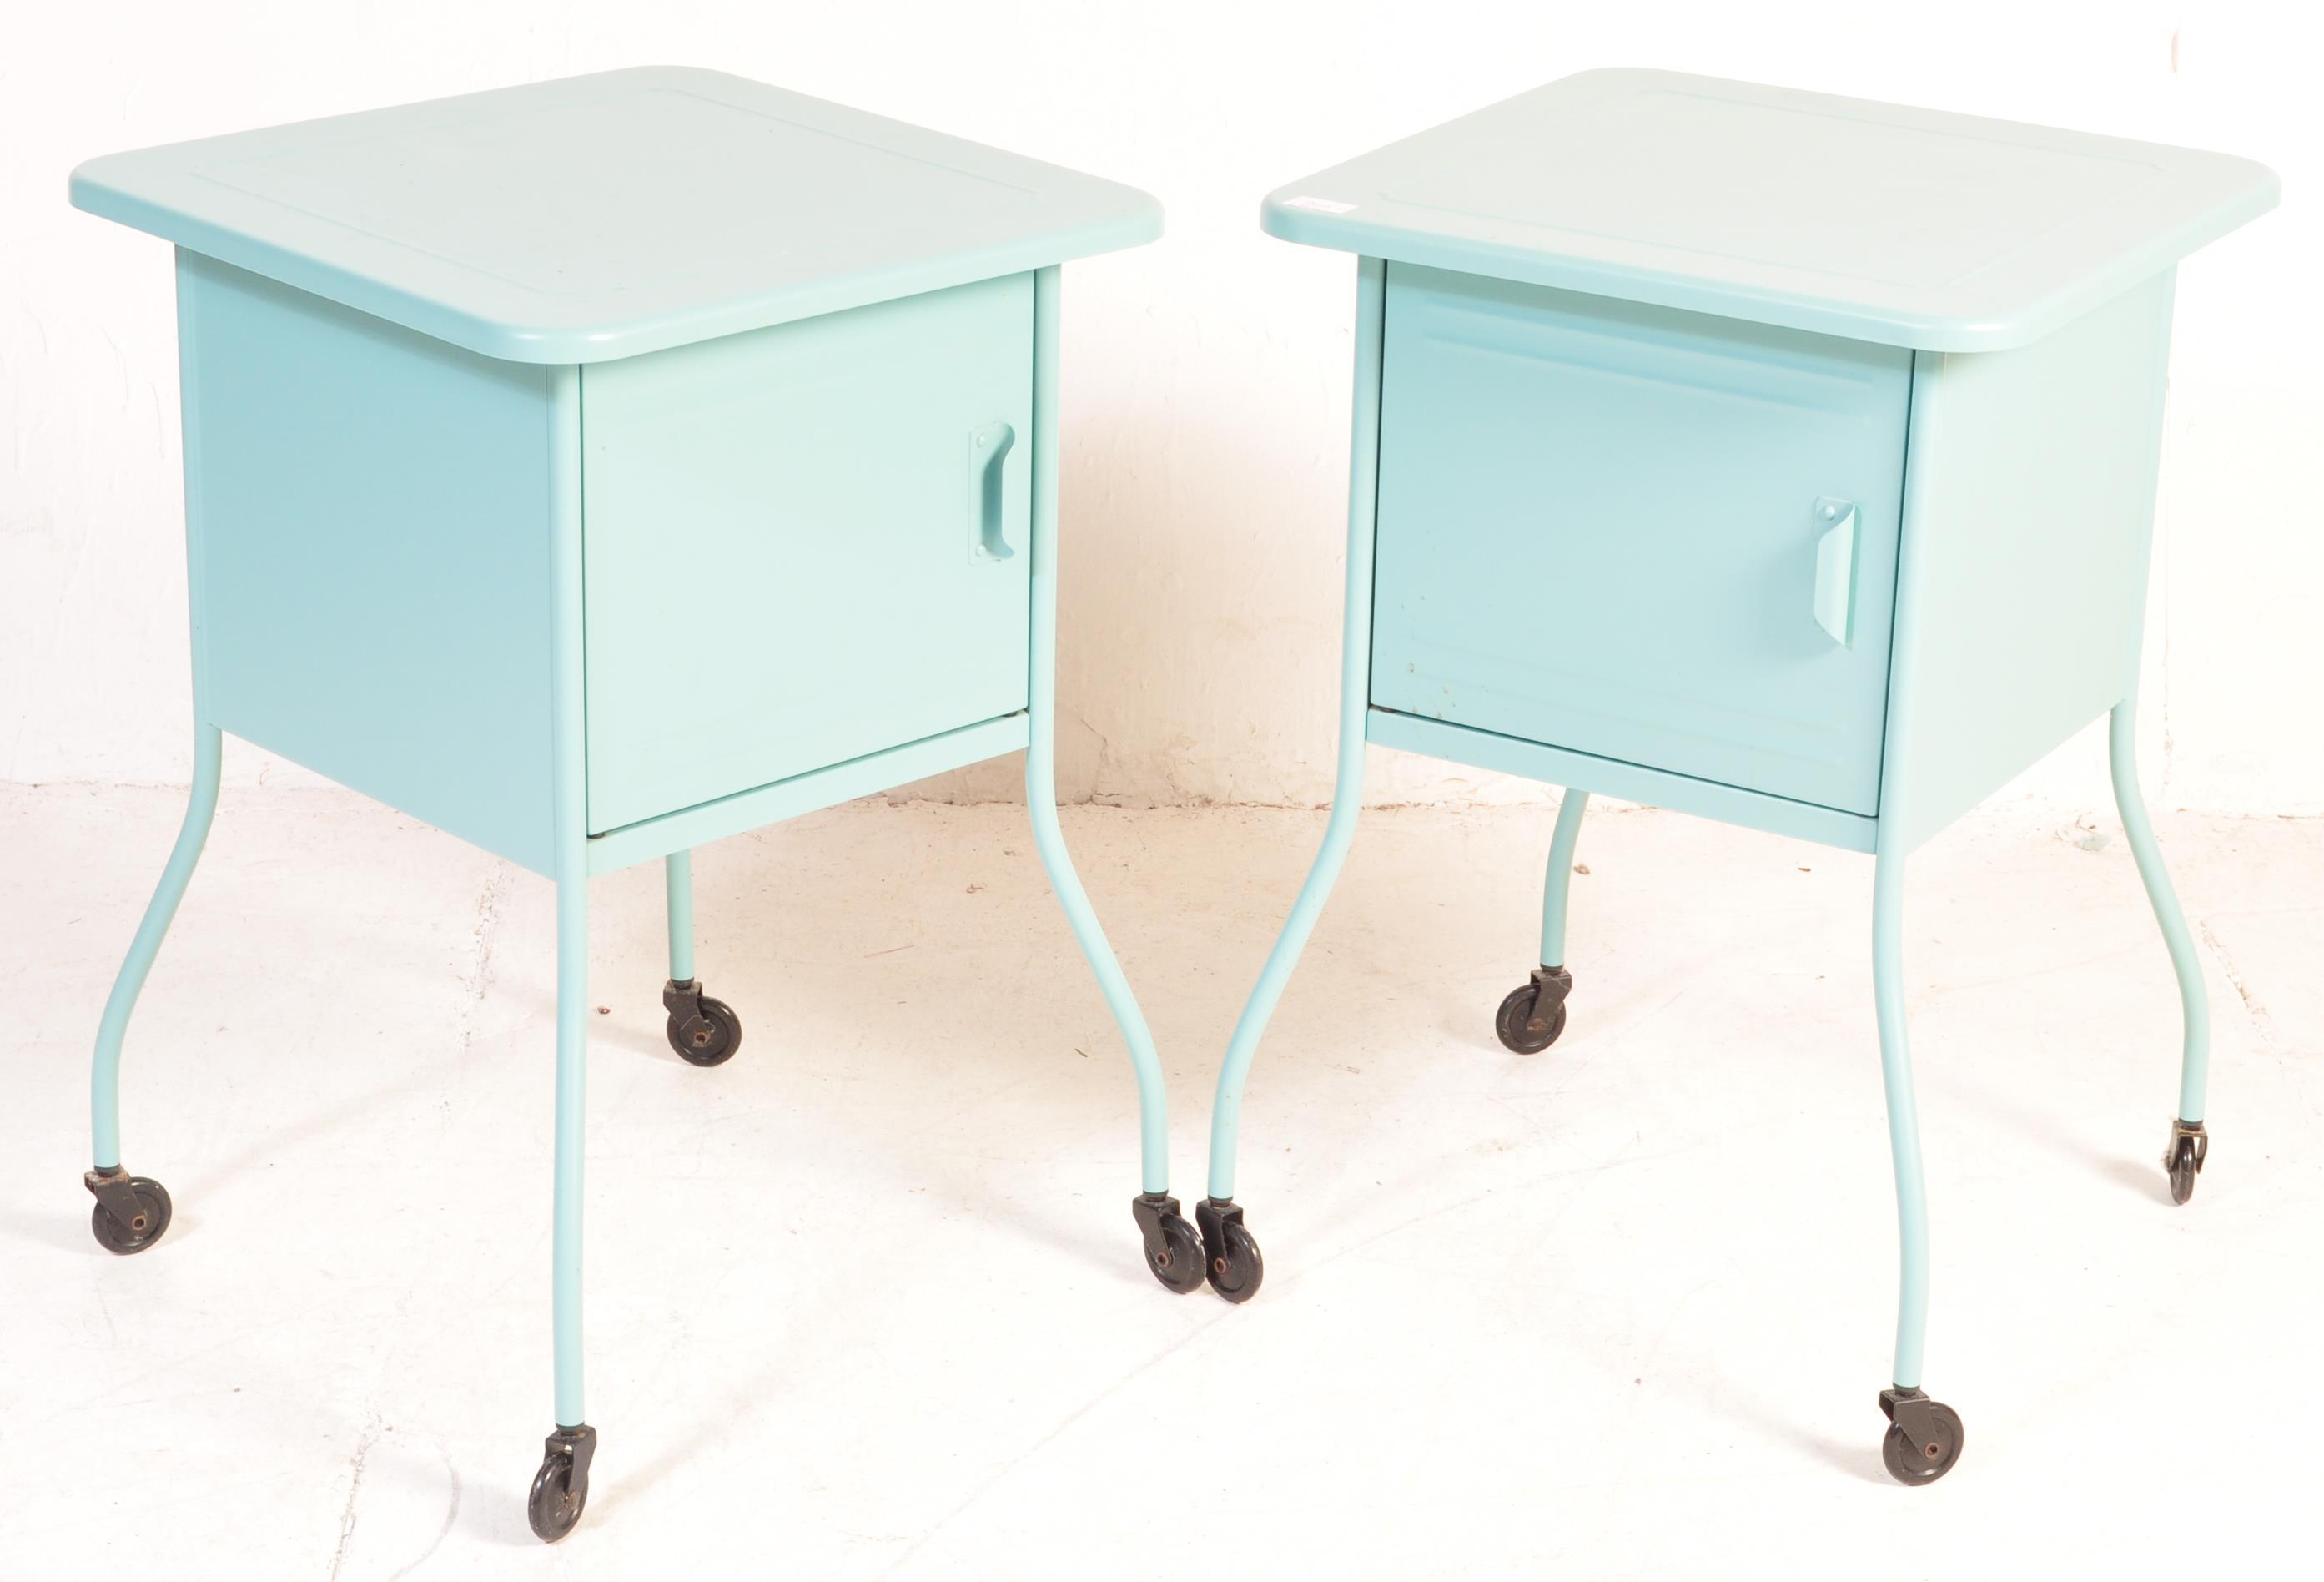 PAIR OF RETRO STYLE PRESSED METAL TIN BEDSIDE TABLES - Image 2 of 4